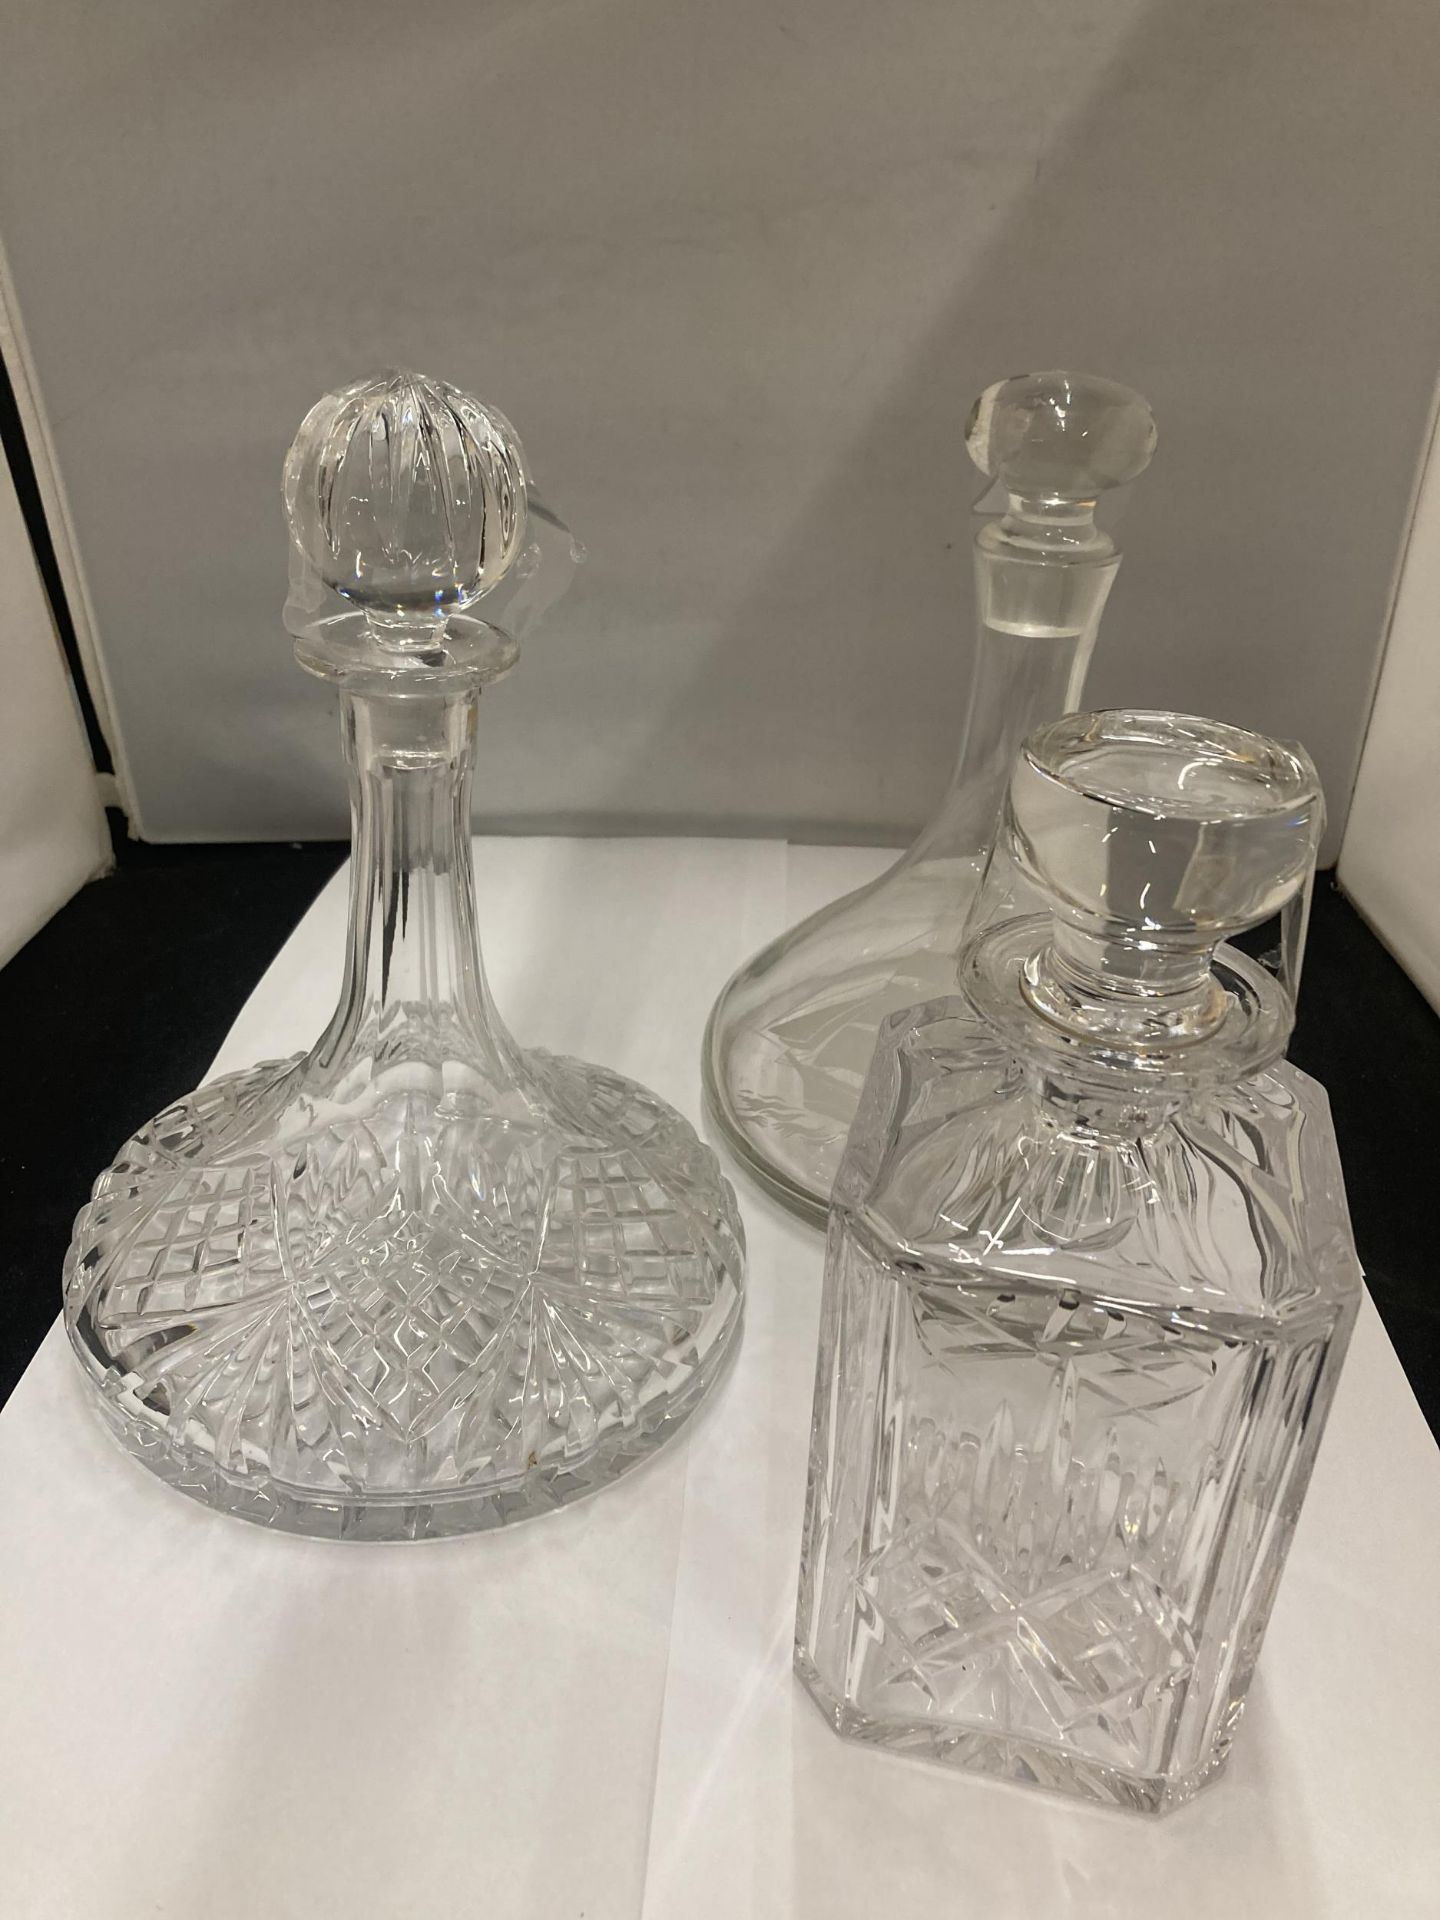 THREE GLASS DECANTERS TO INCLUDE TWO SHIPS DECANTERS